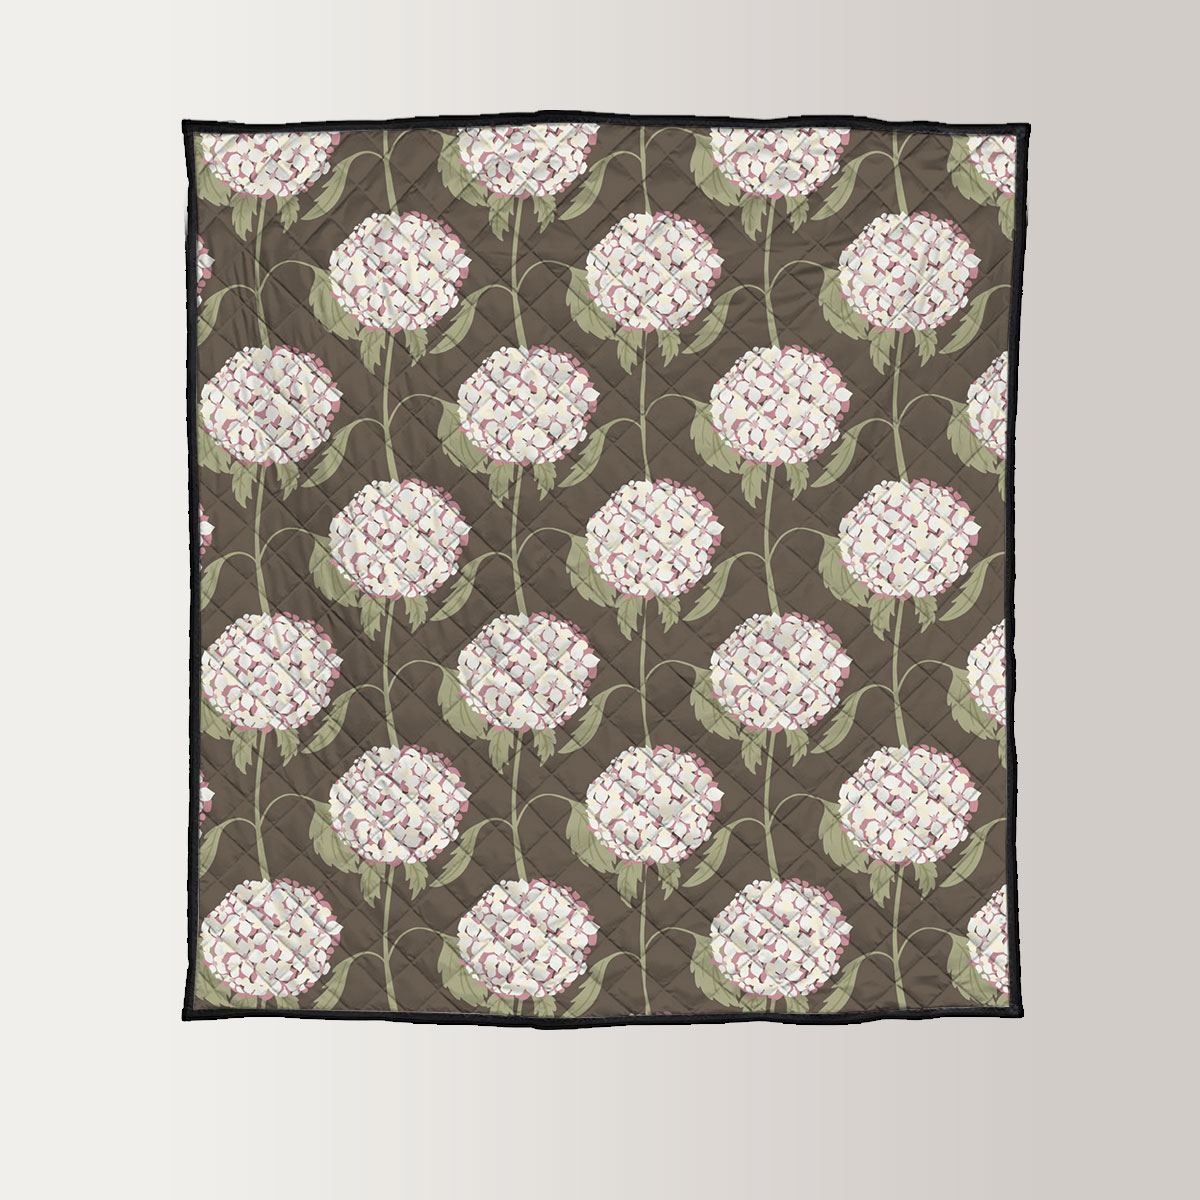 Abstract Nature With White Hydrangea Flowers Quilt